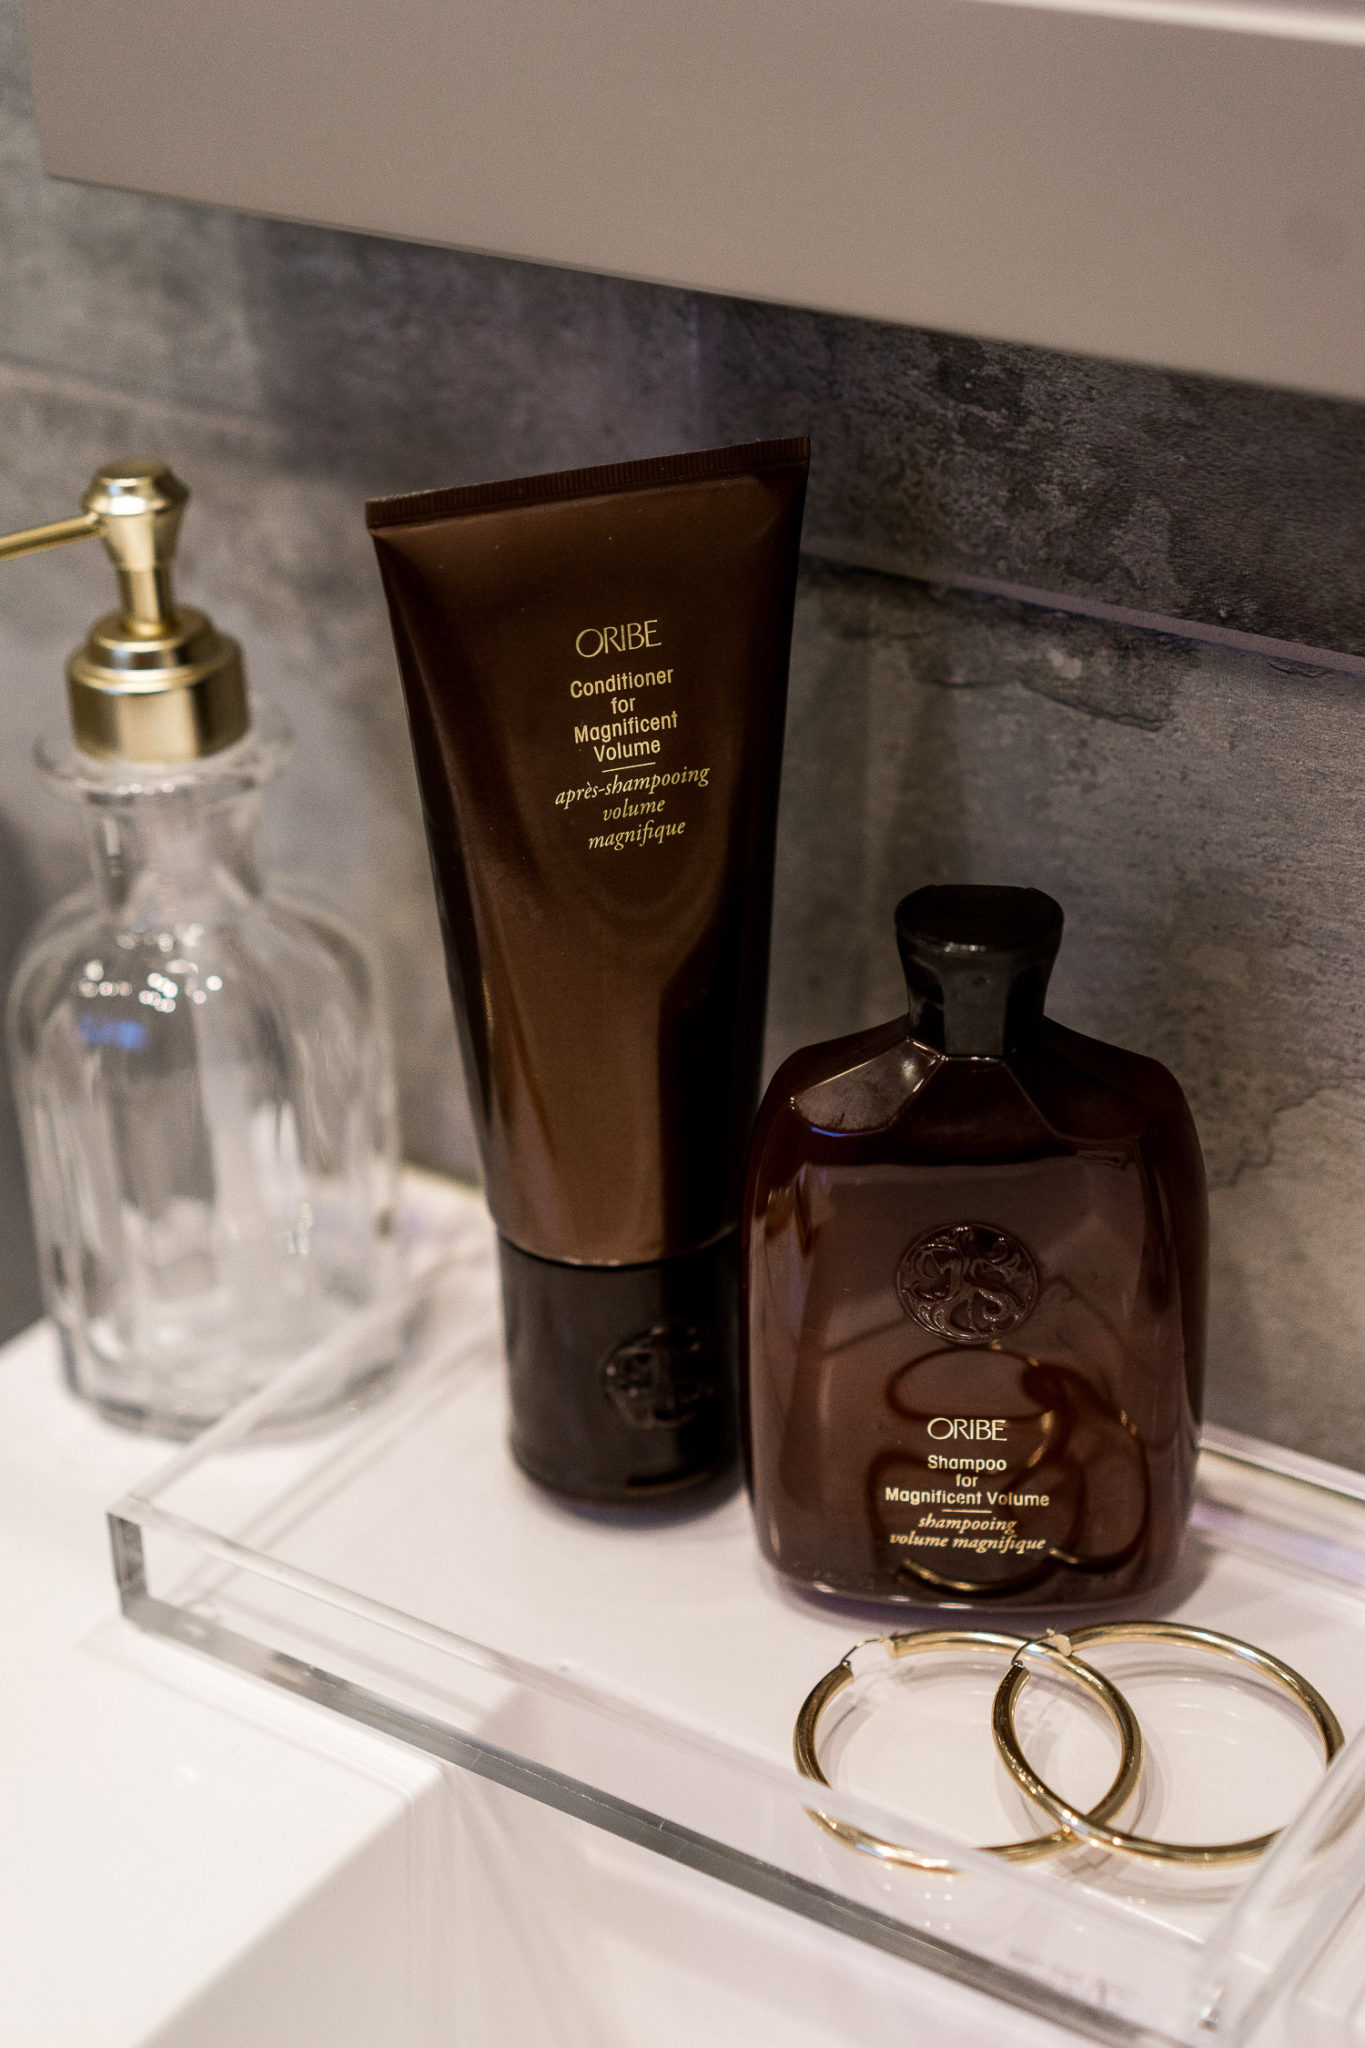 Oribe hair products